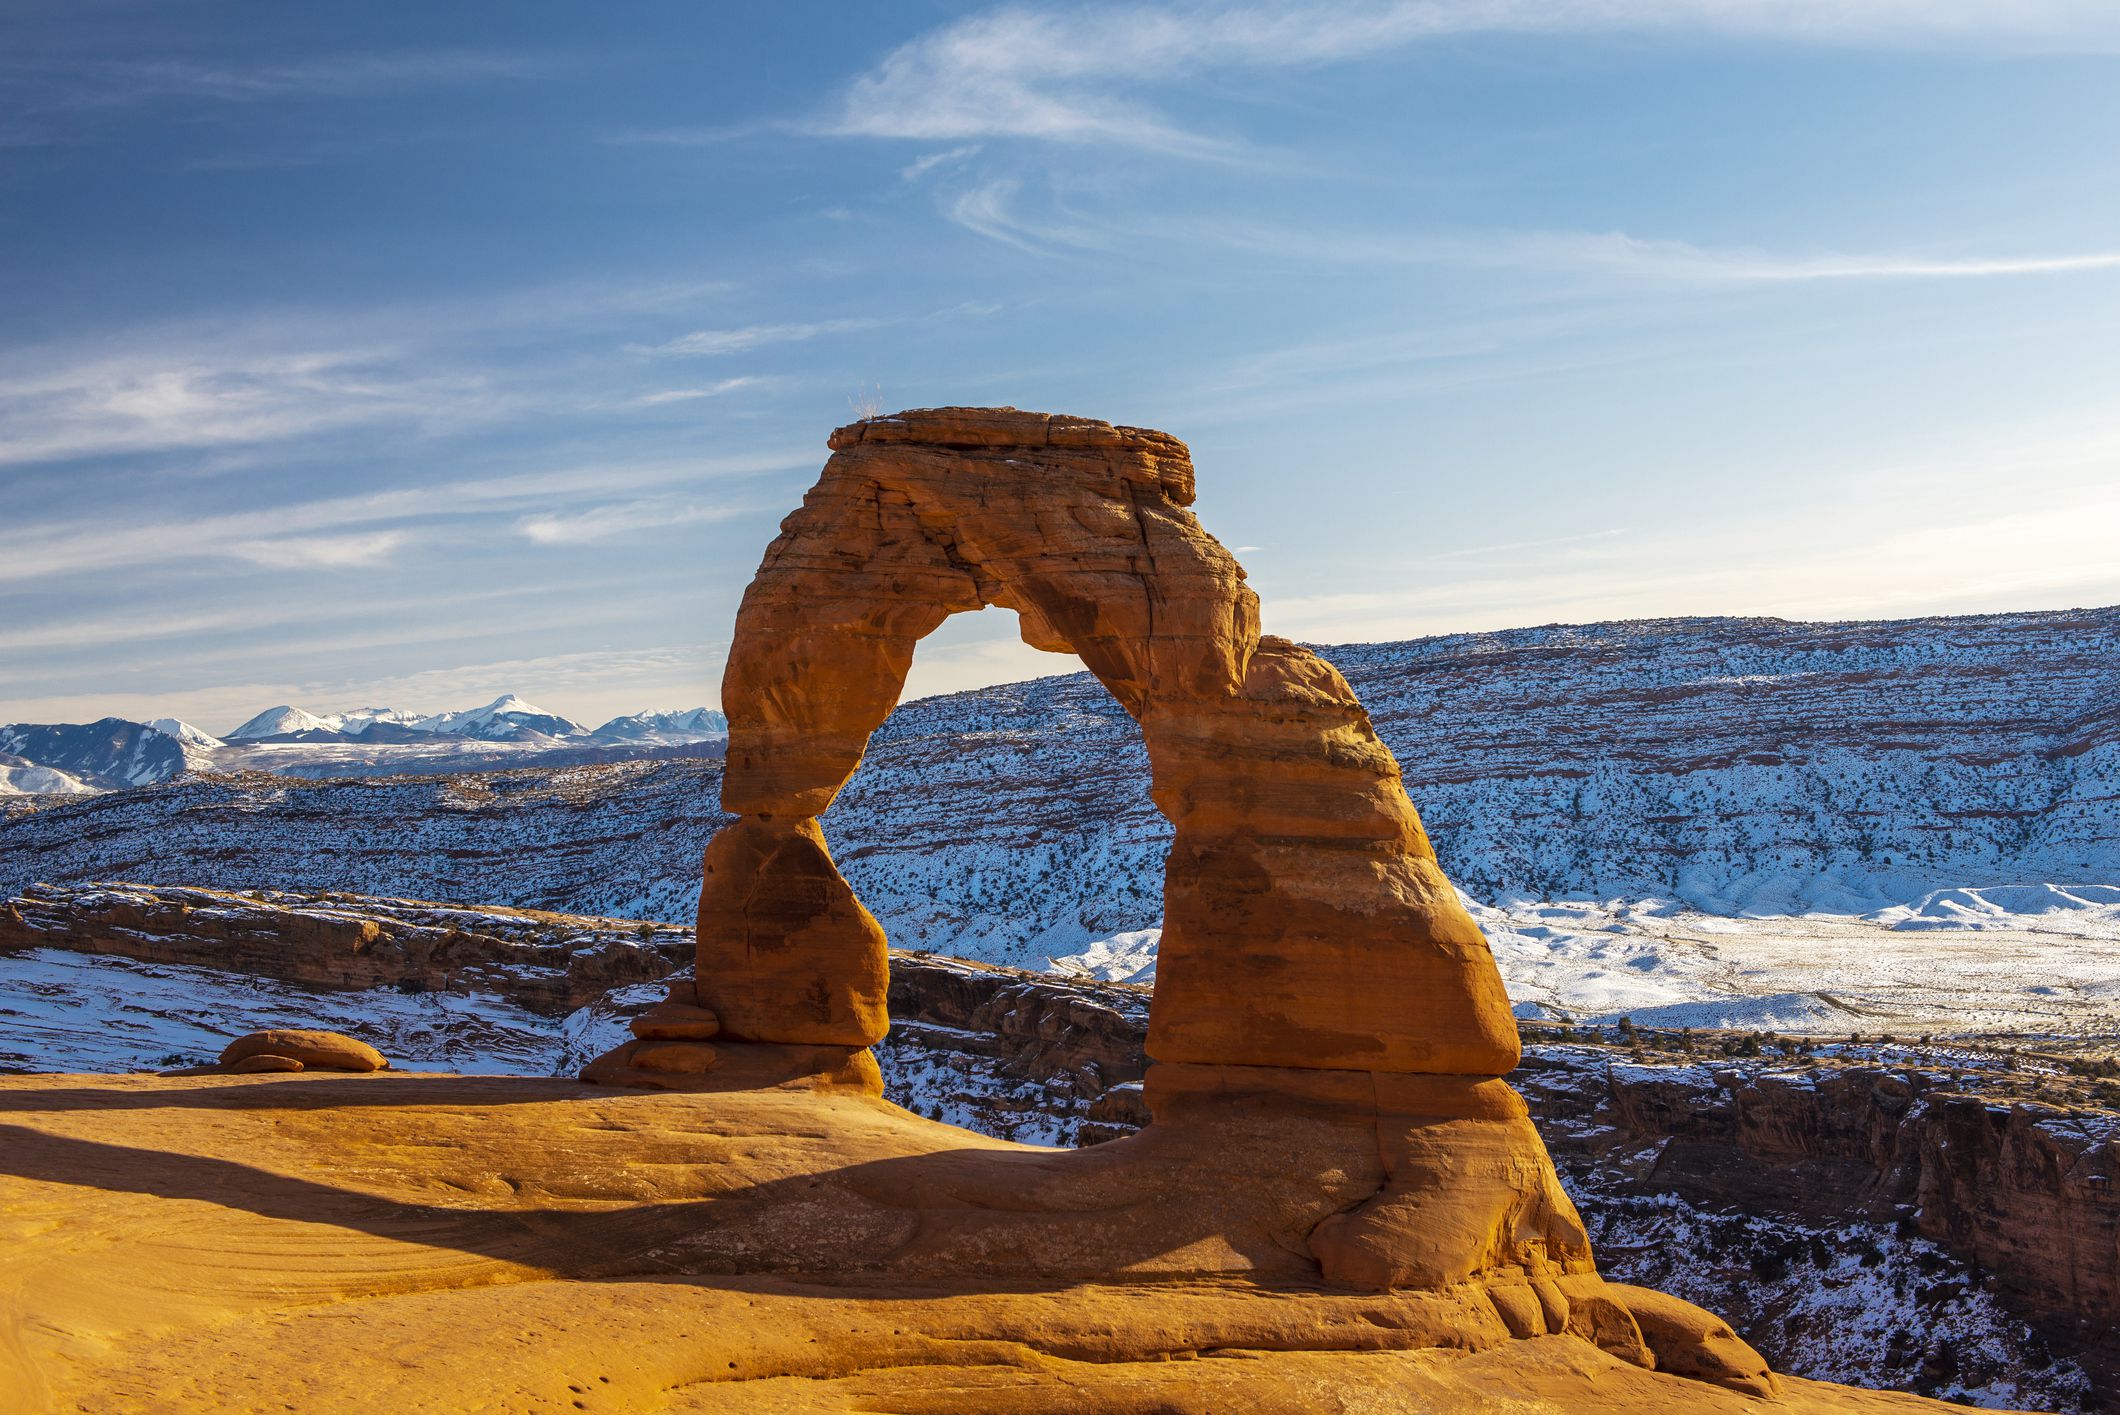 <p>Delicate Arch, the largest free-standing arch in Arches National Park, is even more stunning against a backdrop of snowy ridges. As long as conditions permit, the strenuous hike to the landmark is stunning in winter, with a little more solitude and manageable temperatures.</p><br><p><b>Related:</b> <a href="https://blog.cheapism.com/american-west-photos/">Stunning Photos of Iconic Landscapes in the American West</a></p>